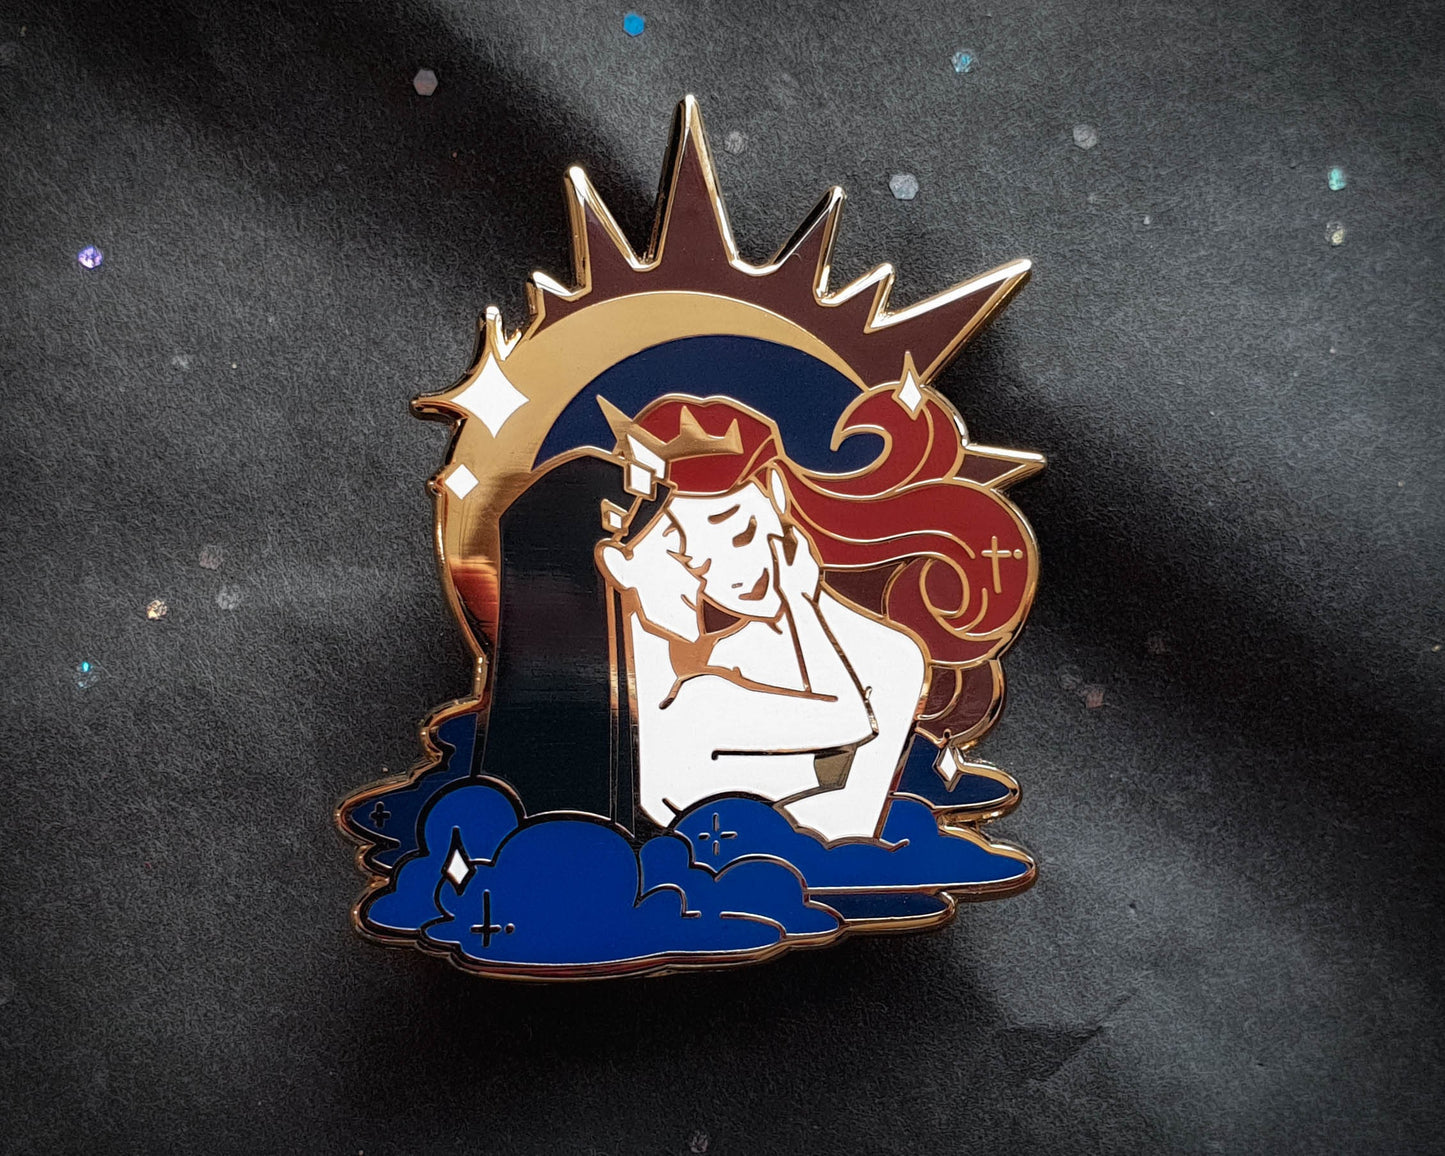 The Lovers - Hard Enamel Pin - Star-crossed Lovers (Collaboration by Astermorn and Annadrawsstuff)